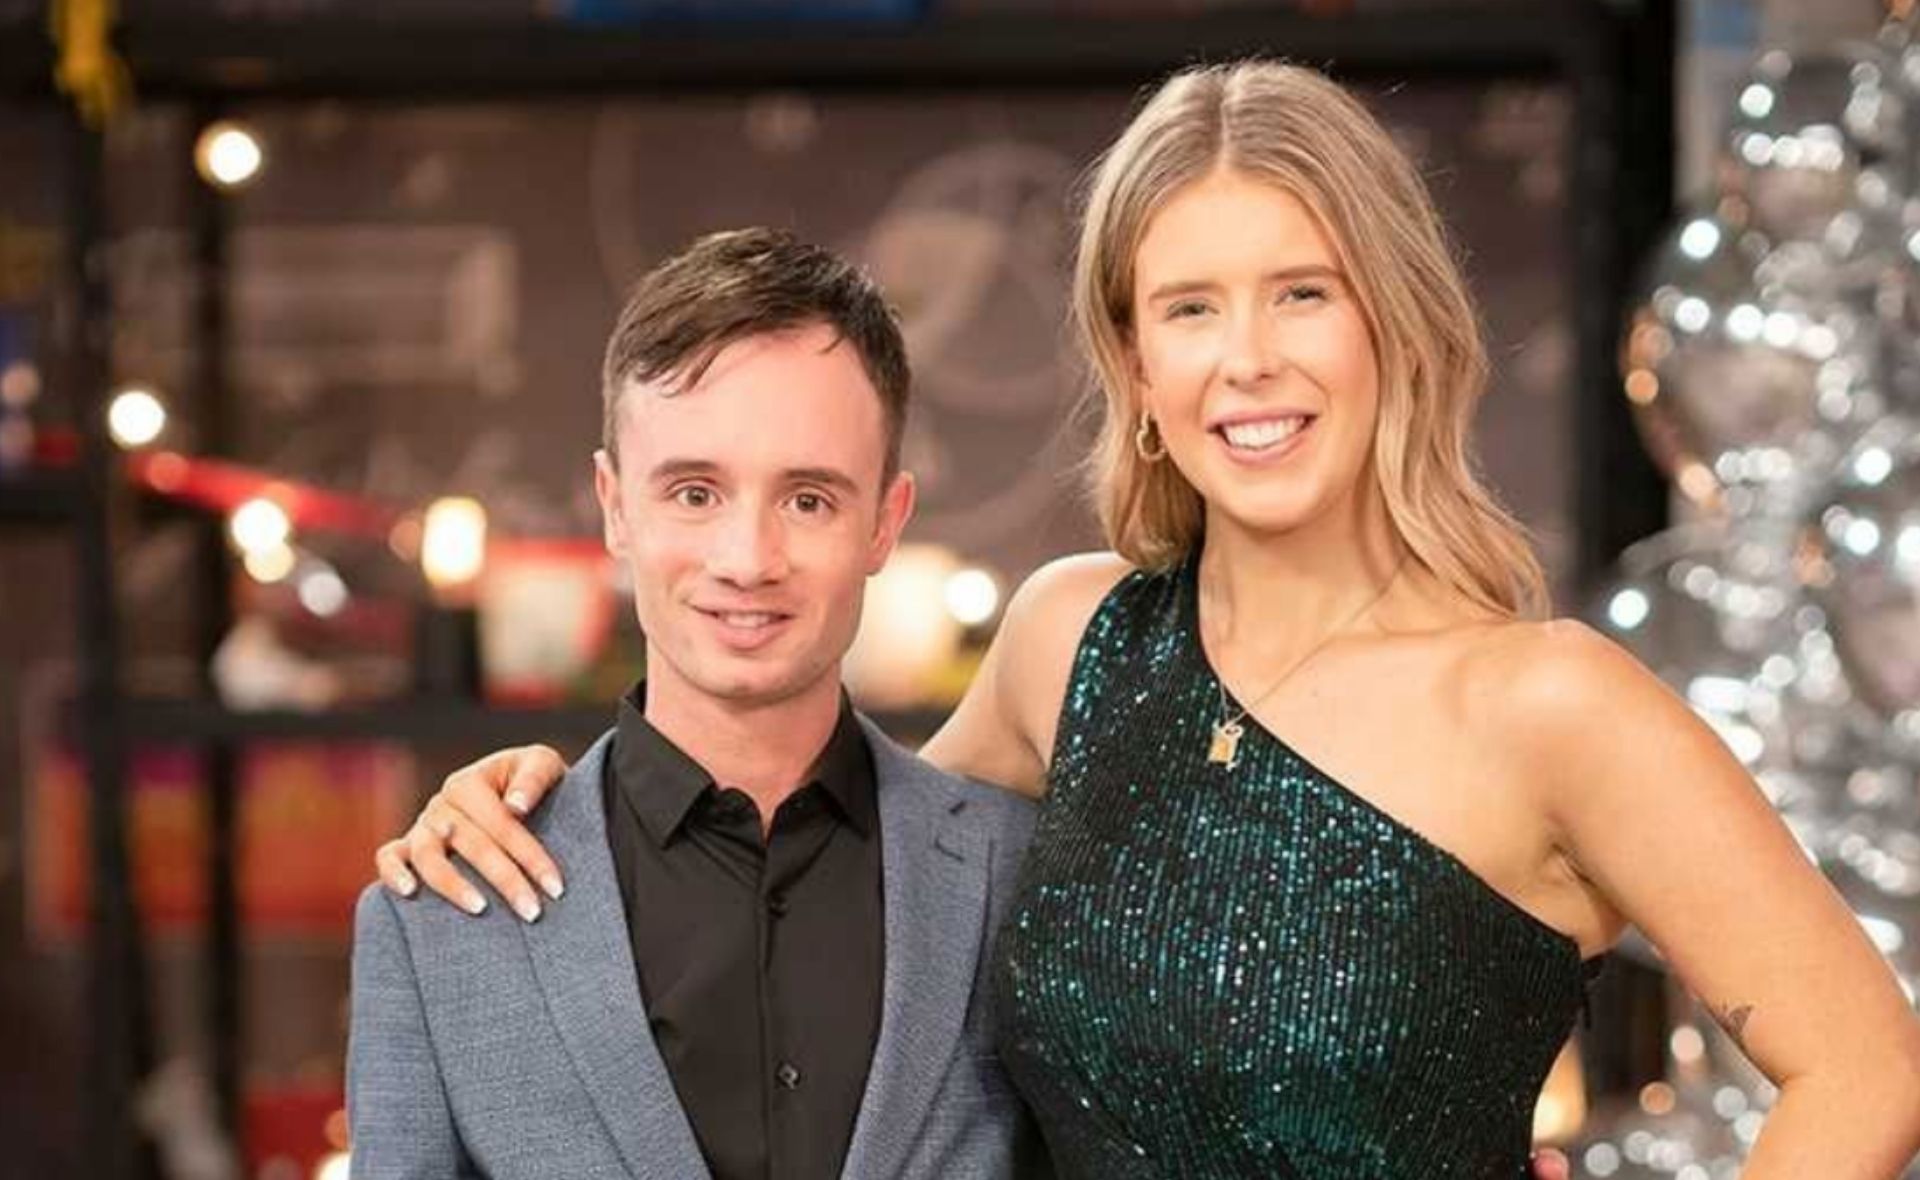 EXCLUSIVE: Beauty and the Geek’s winners Lachlan Mansell and Kiera Johnstone spill on their life changing journey